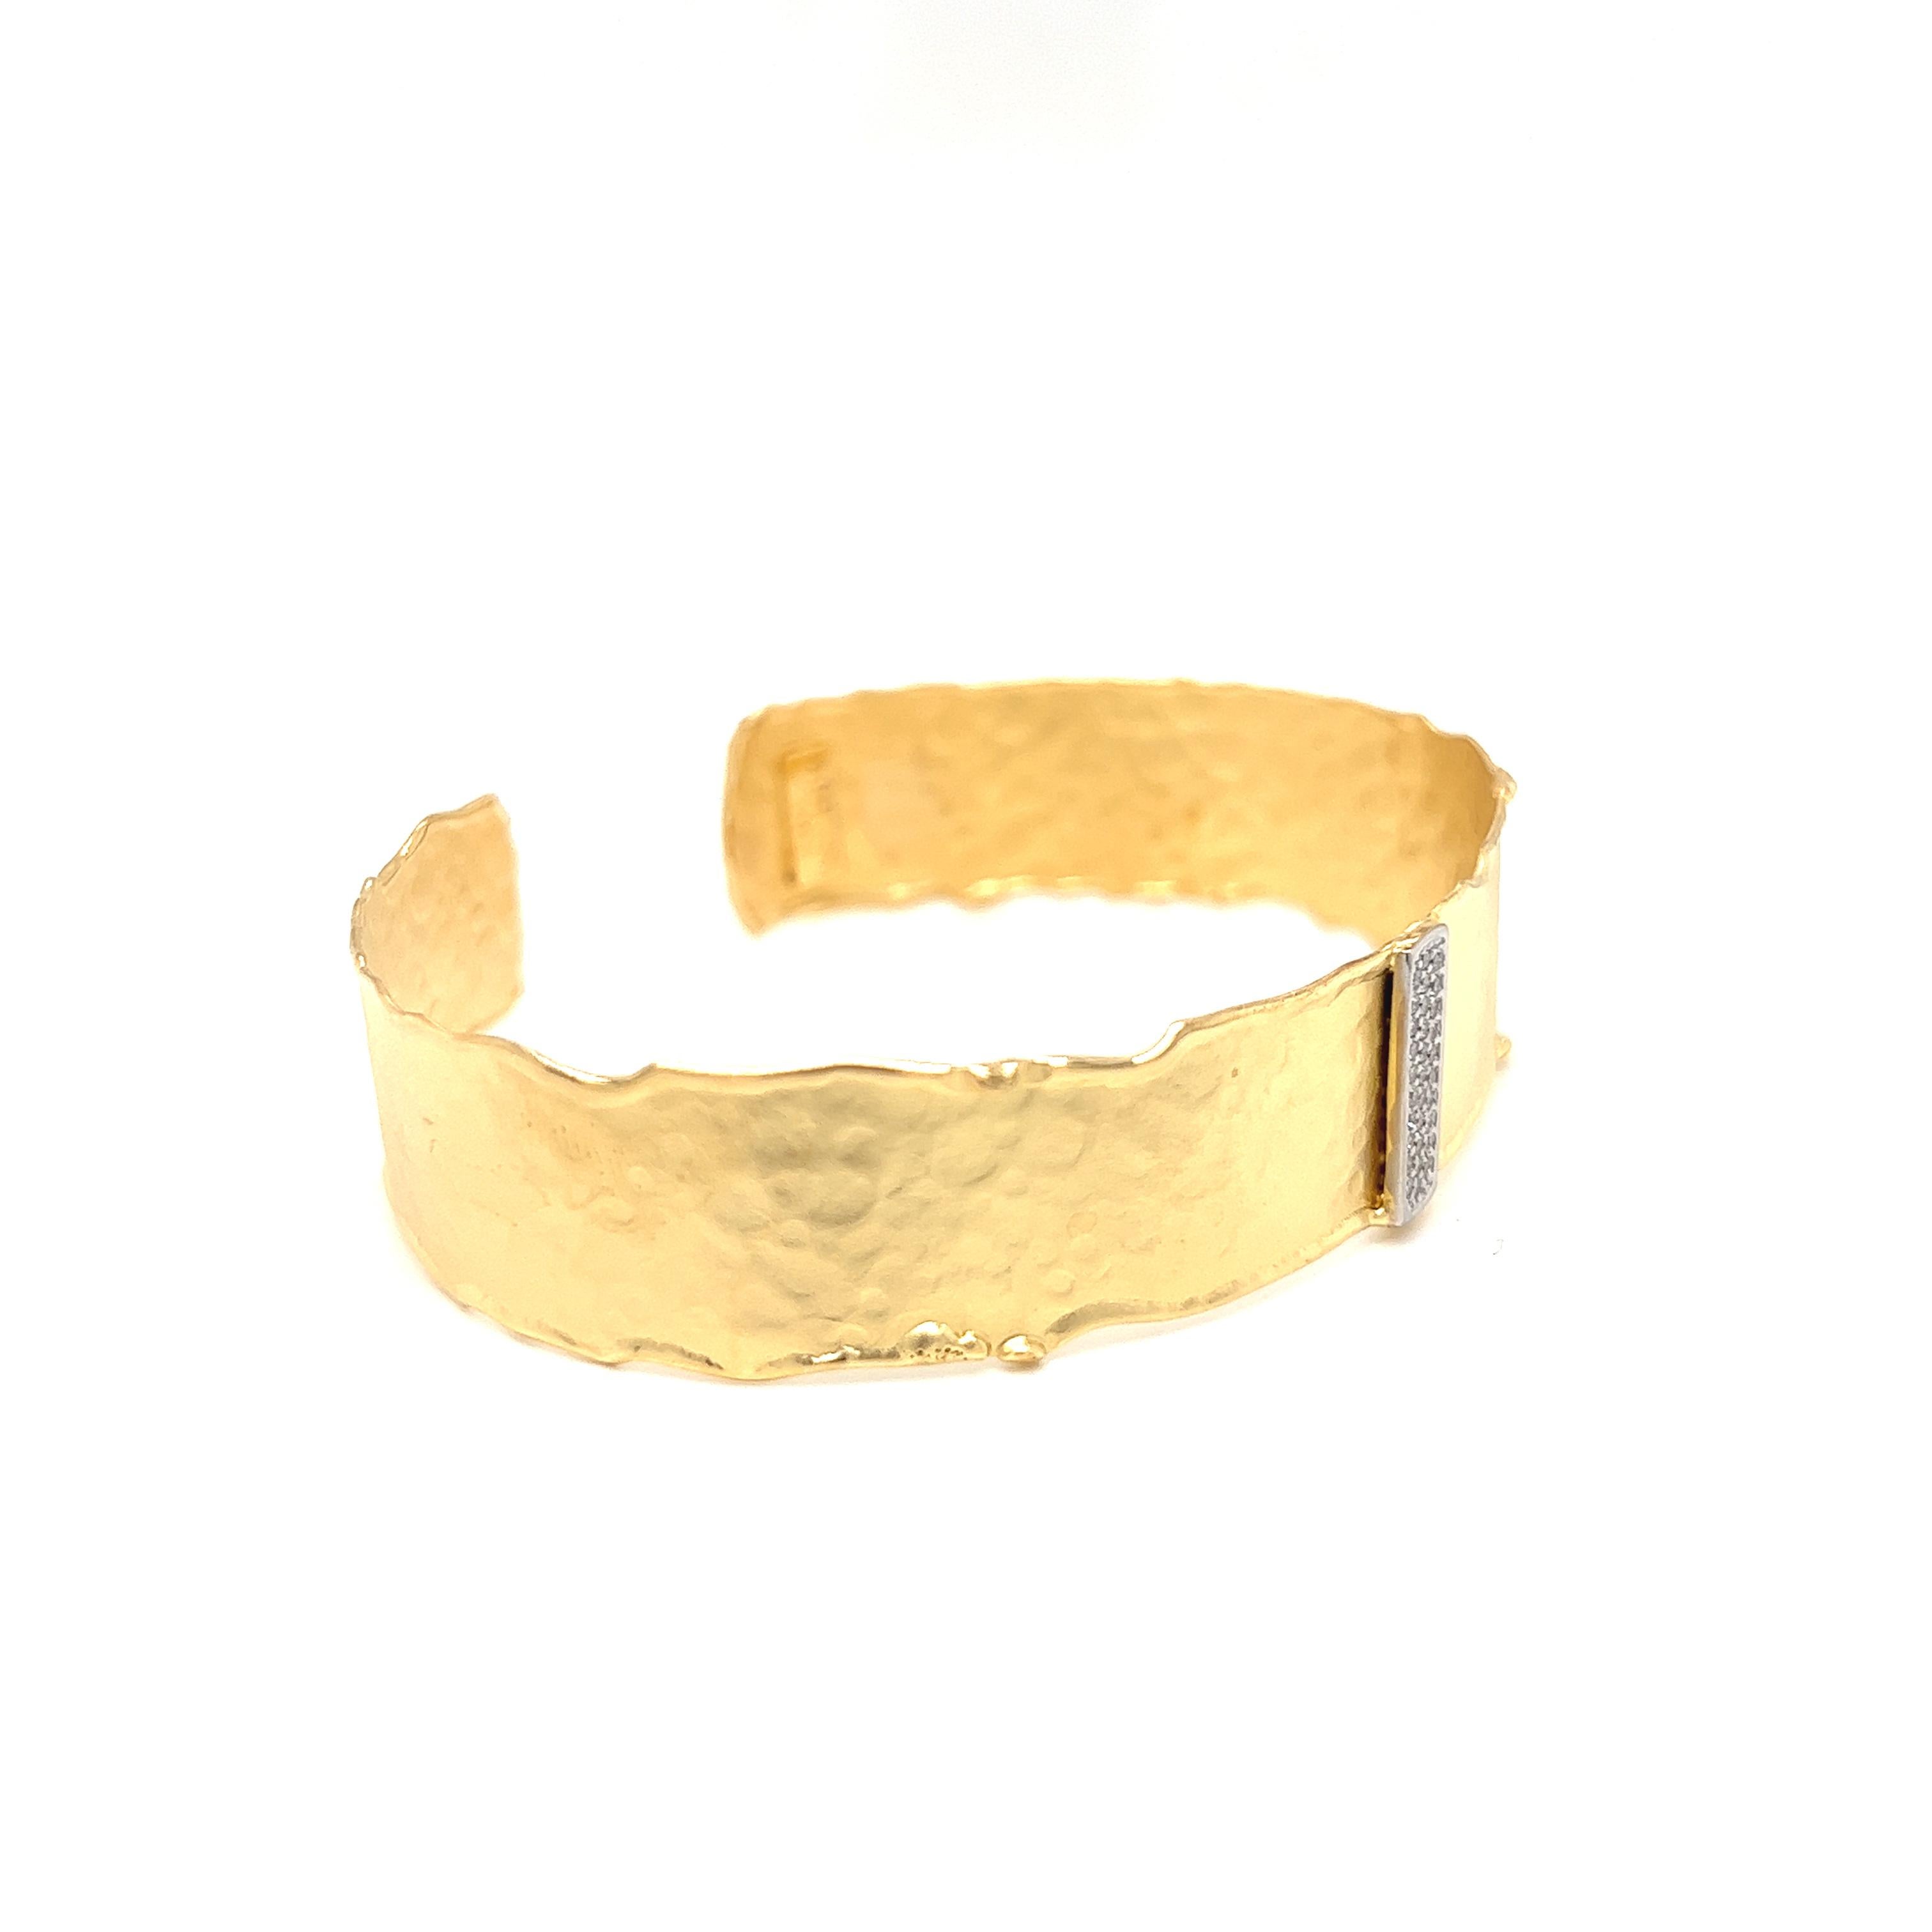 14 Karat Yellow Gold Hand-Crafted Matte and Hammer-Finished Scallop-Edged Open Cuff Bracelet, Accented with 0.19 Carats of a Pave Set Diamond Bar.
